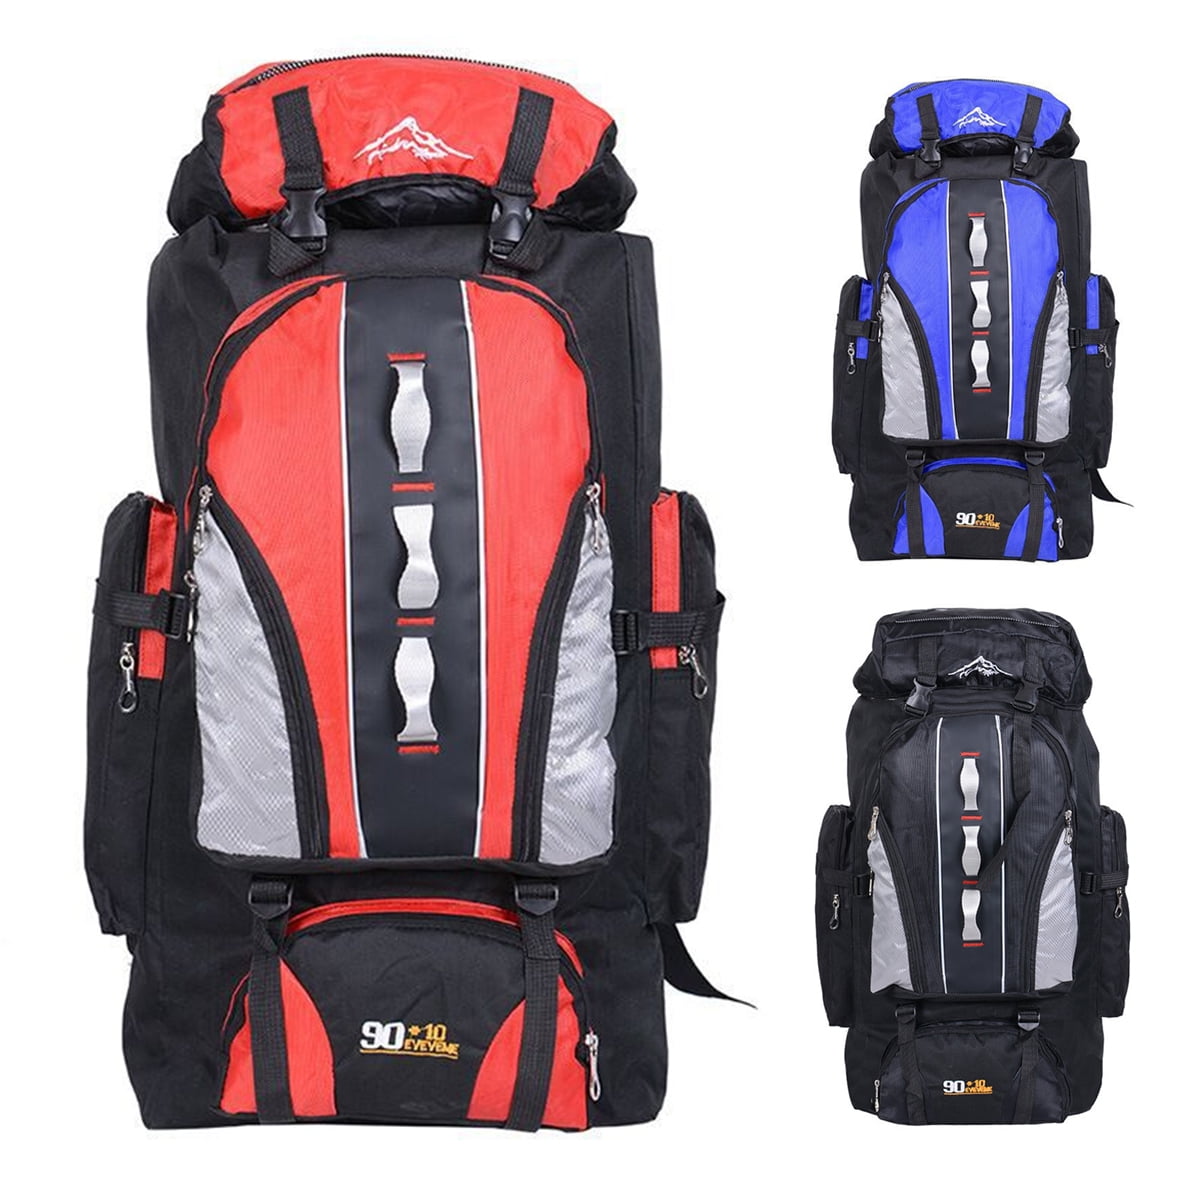 Mens Waterpoof Backpack  Rucksack Bag for Work Travel Camping School Sports NEW 